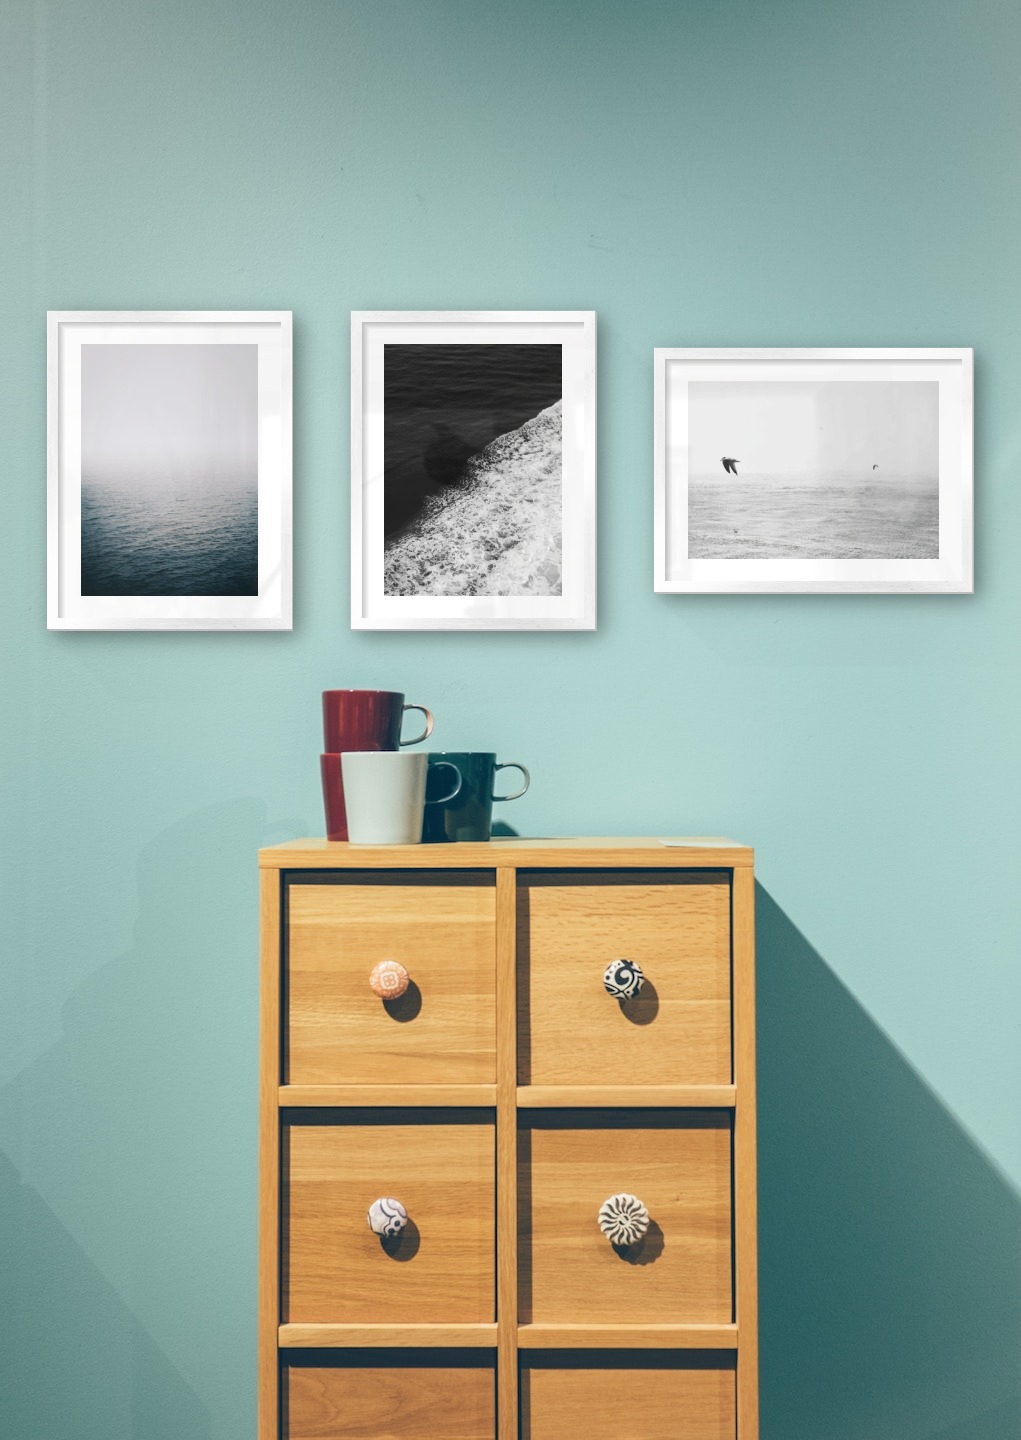 Gallery wall with picture frames in silver in sizes 30x40 with prints "Fog over the sea", "Swell from waves" and "Birds over the sea"